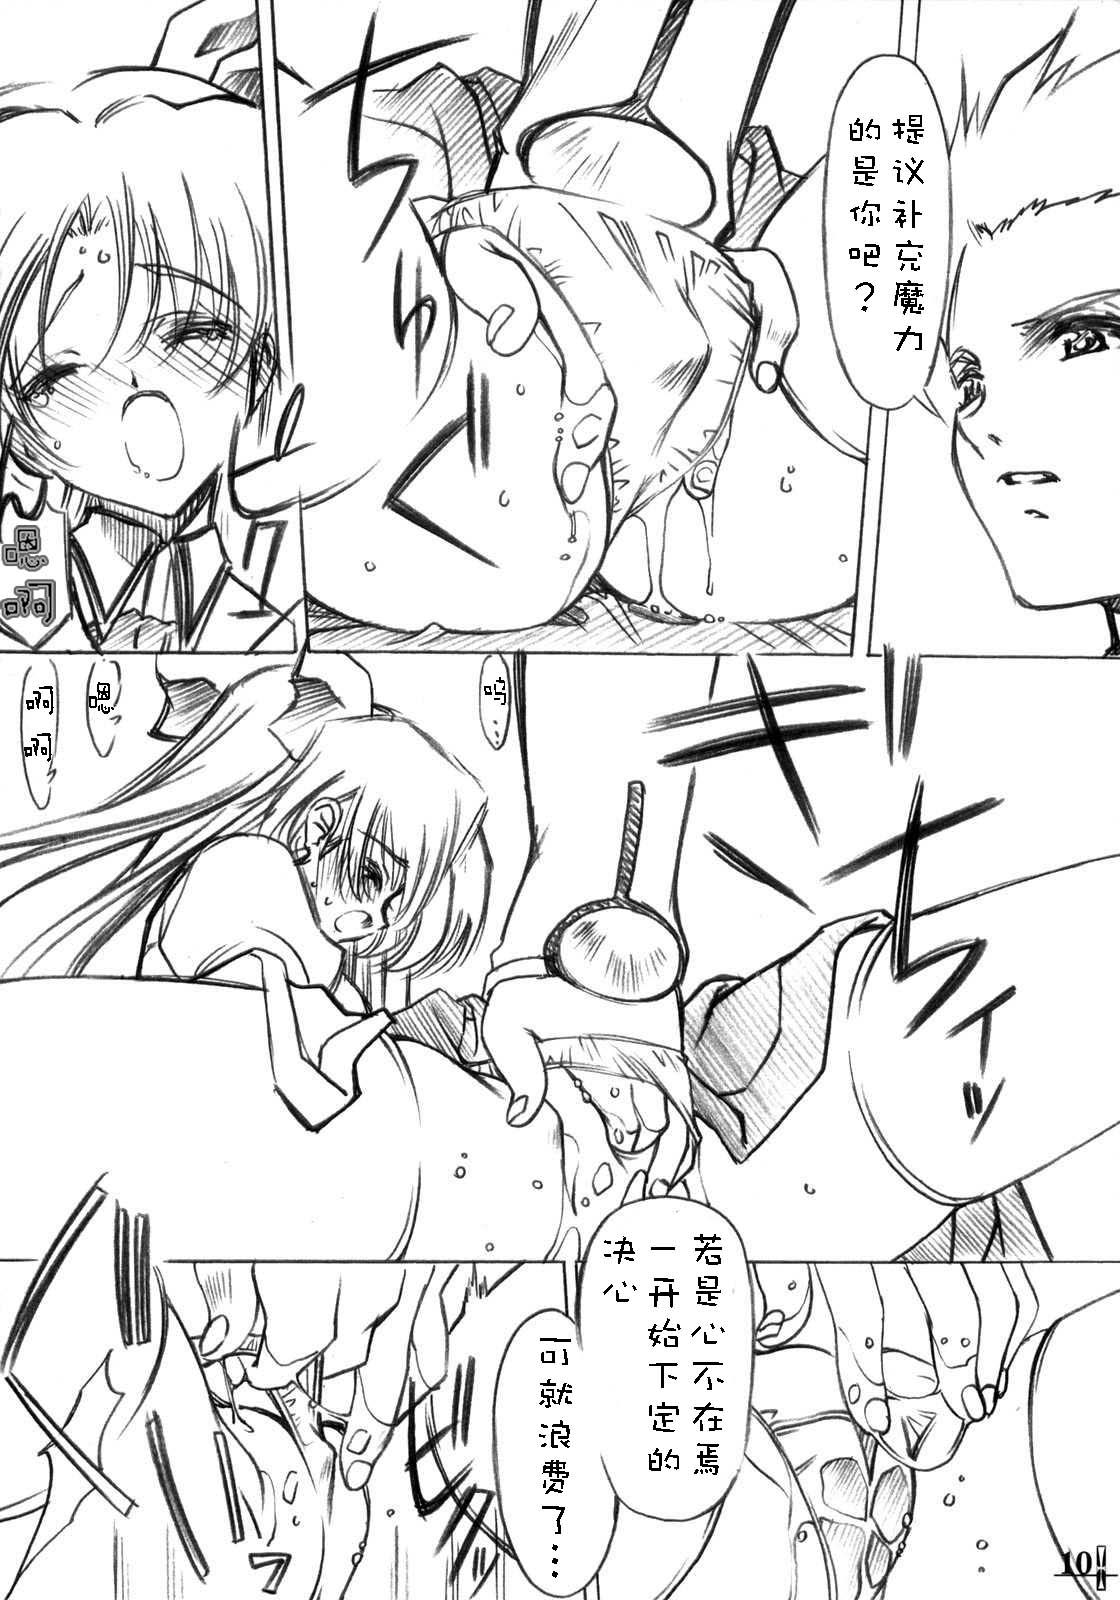 Blowjob Seven Cardinal Sins みりおんばんく - Fate stay night Jerk - Page 9